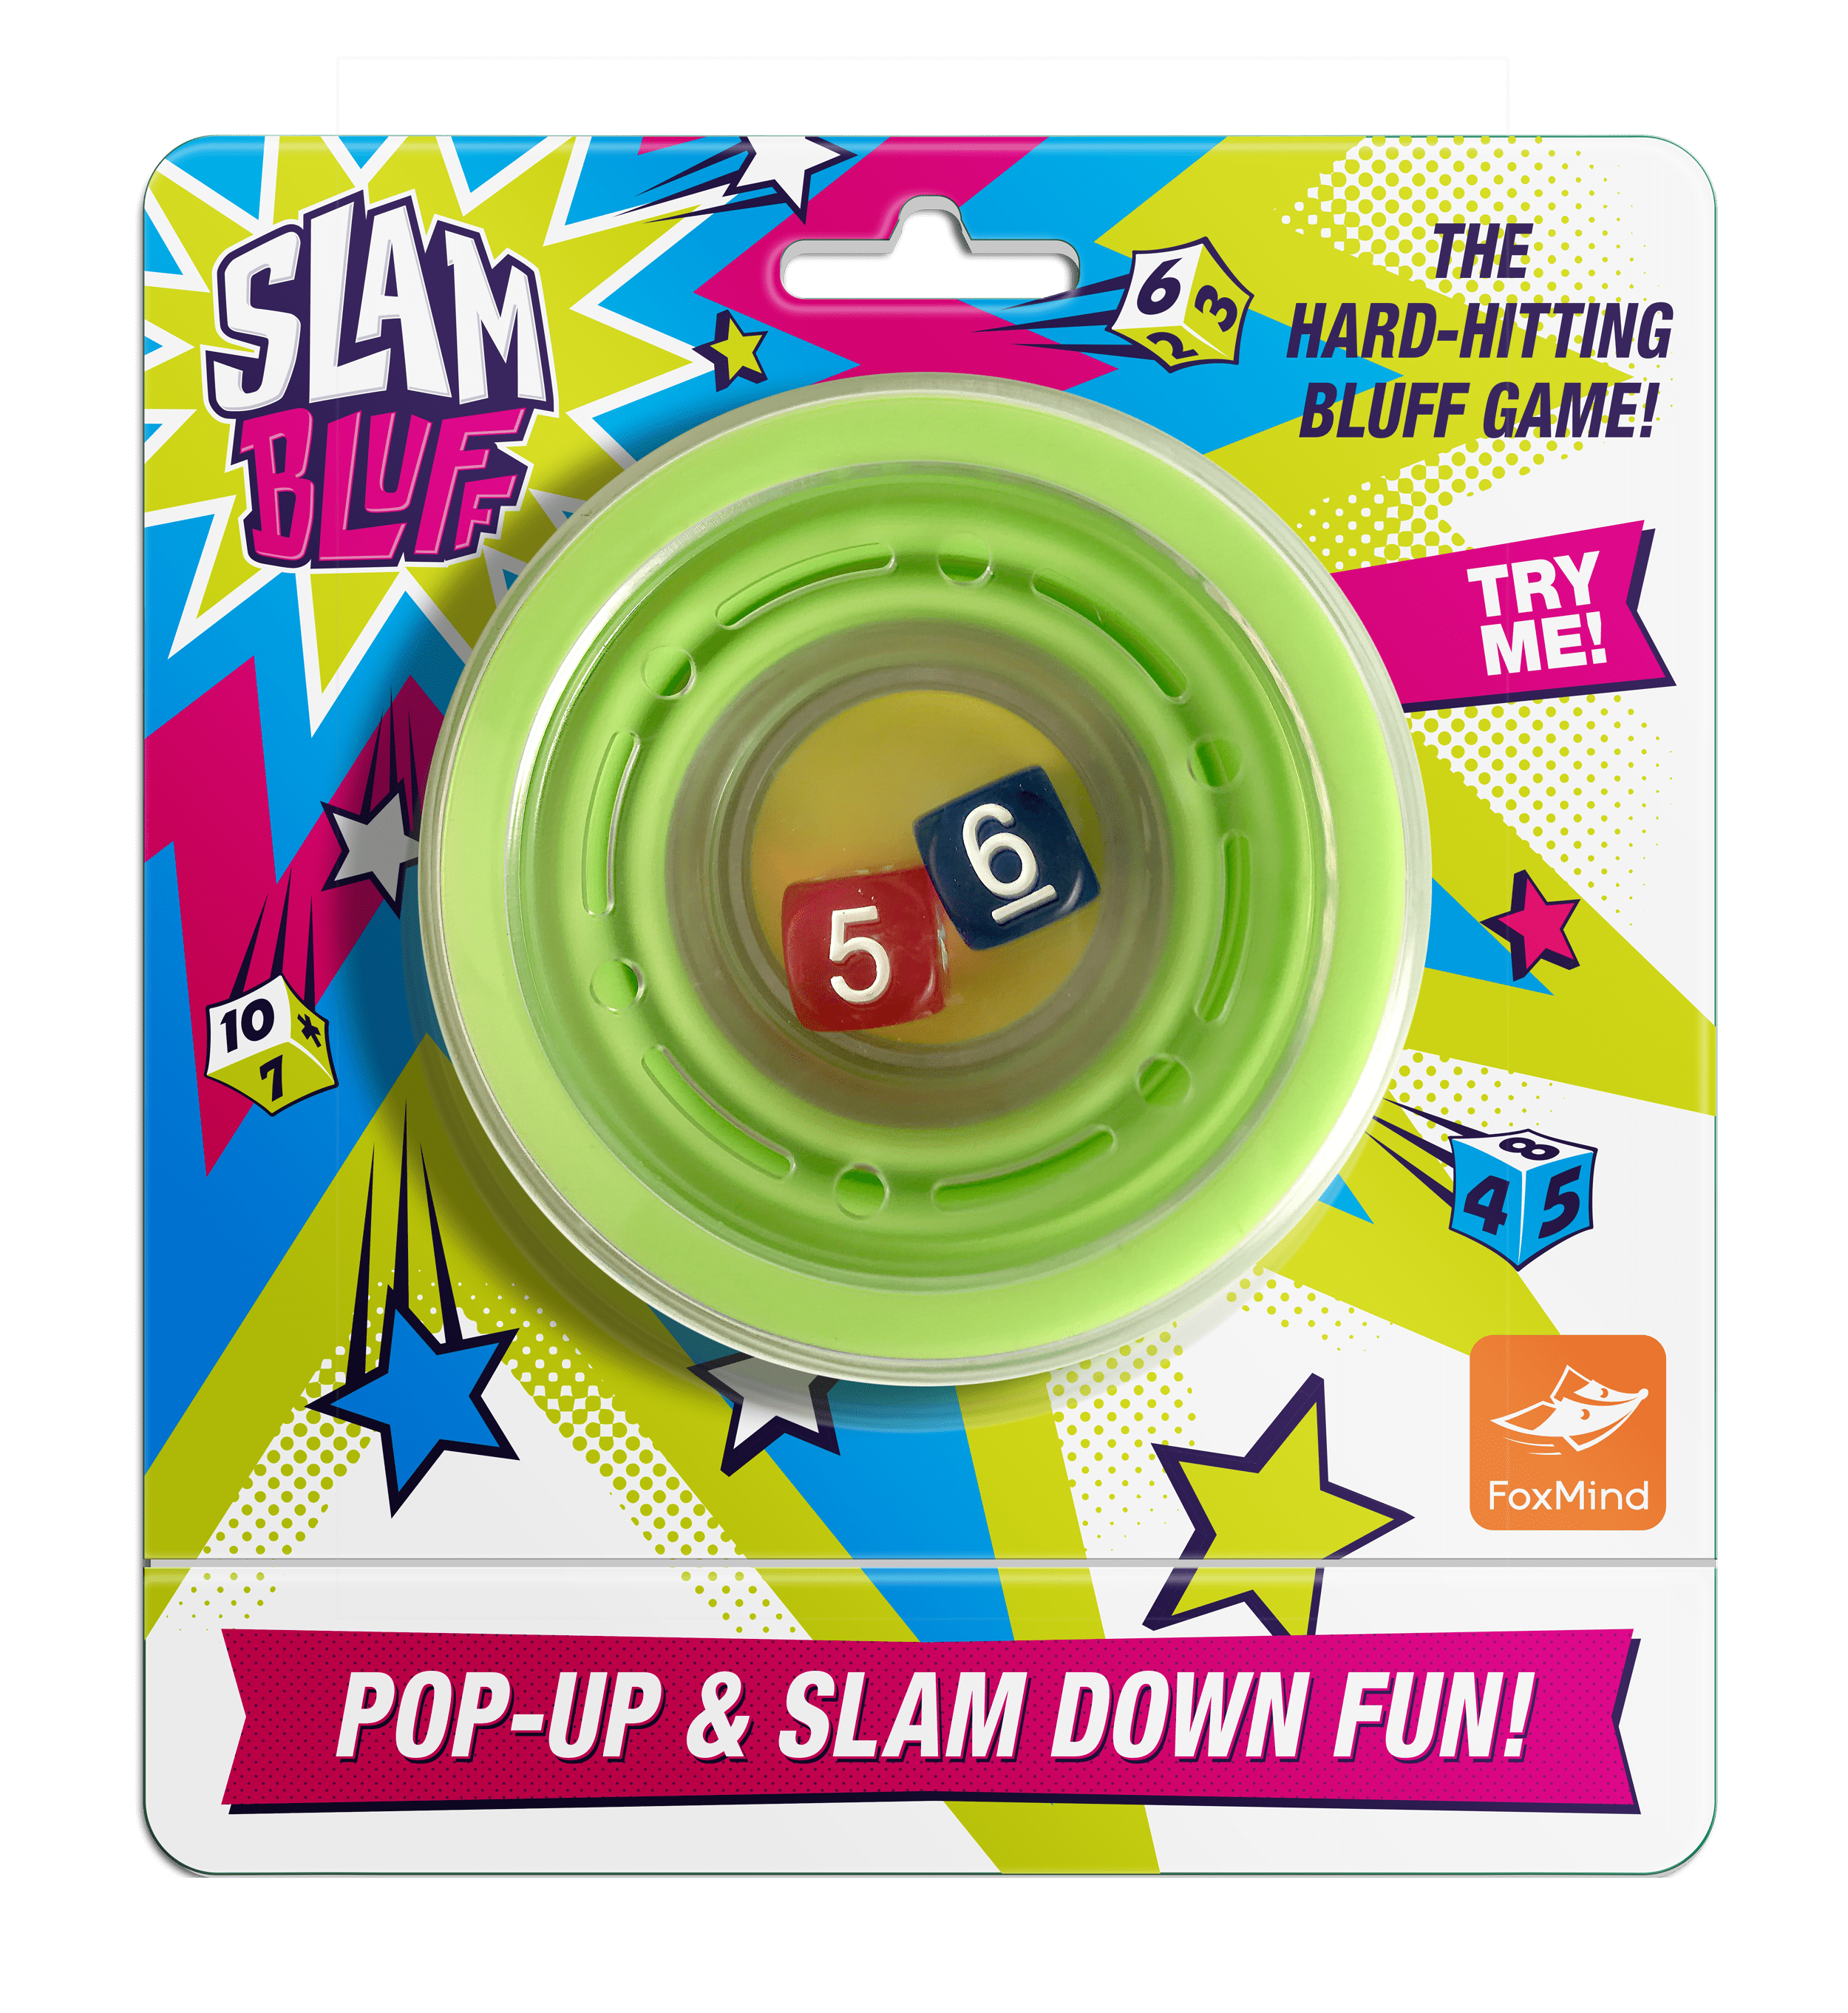 LAST CHANCE - LIMITED STOCK - Slam Bluff Dice Game - Easy - Children's Game - Fun Kid's Dice Game - Math Numbers